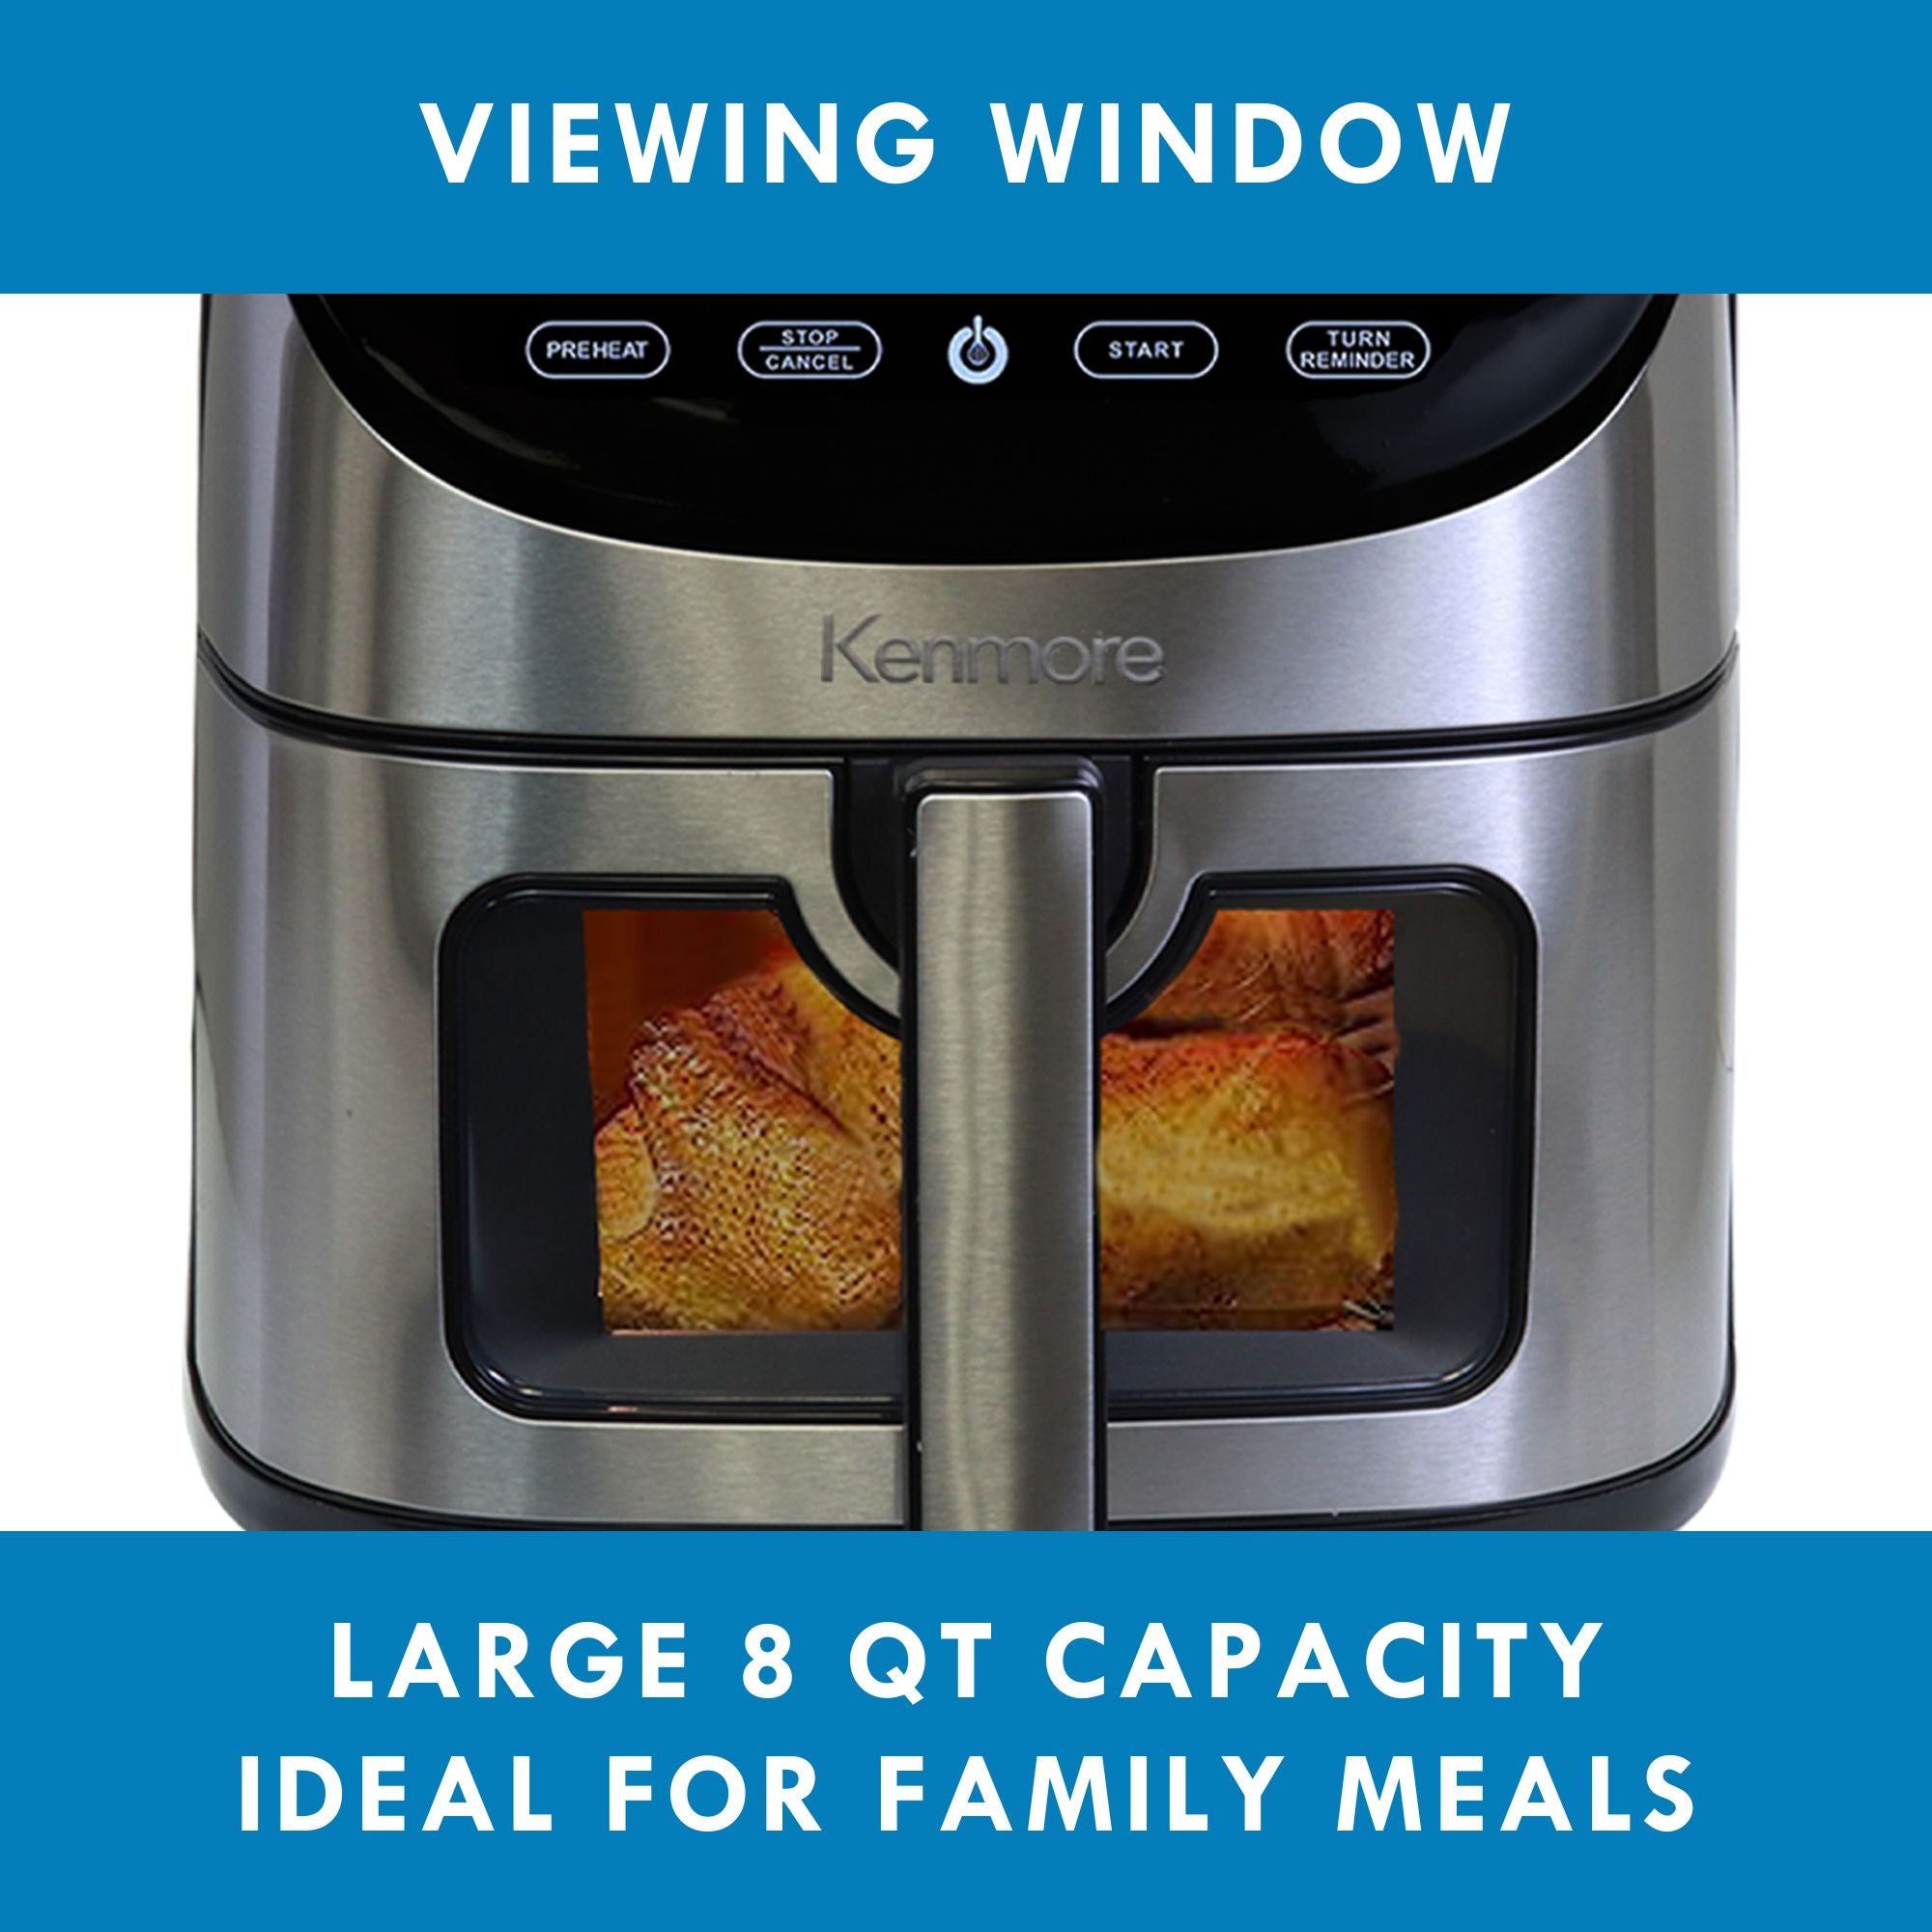 Front view of Kenmore 12-in-1 air fryer with a whole chicken inside. Text above reads, "Viewing window" and text below reads, "Large 8 quart capacity ideal for family meals."